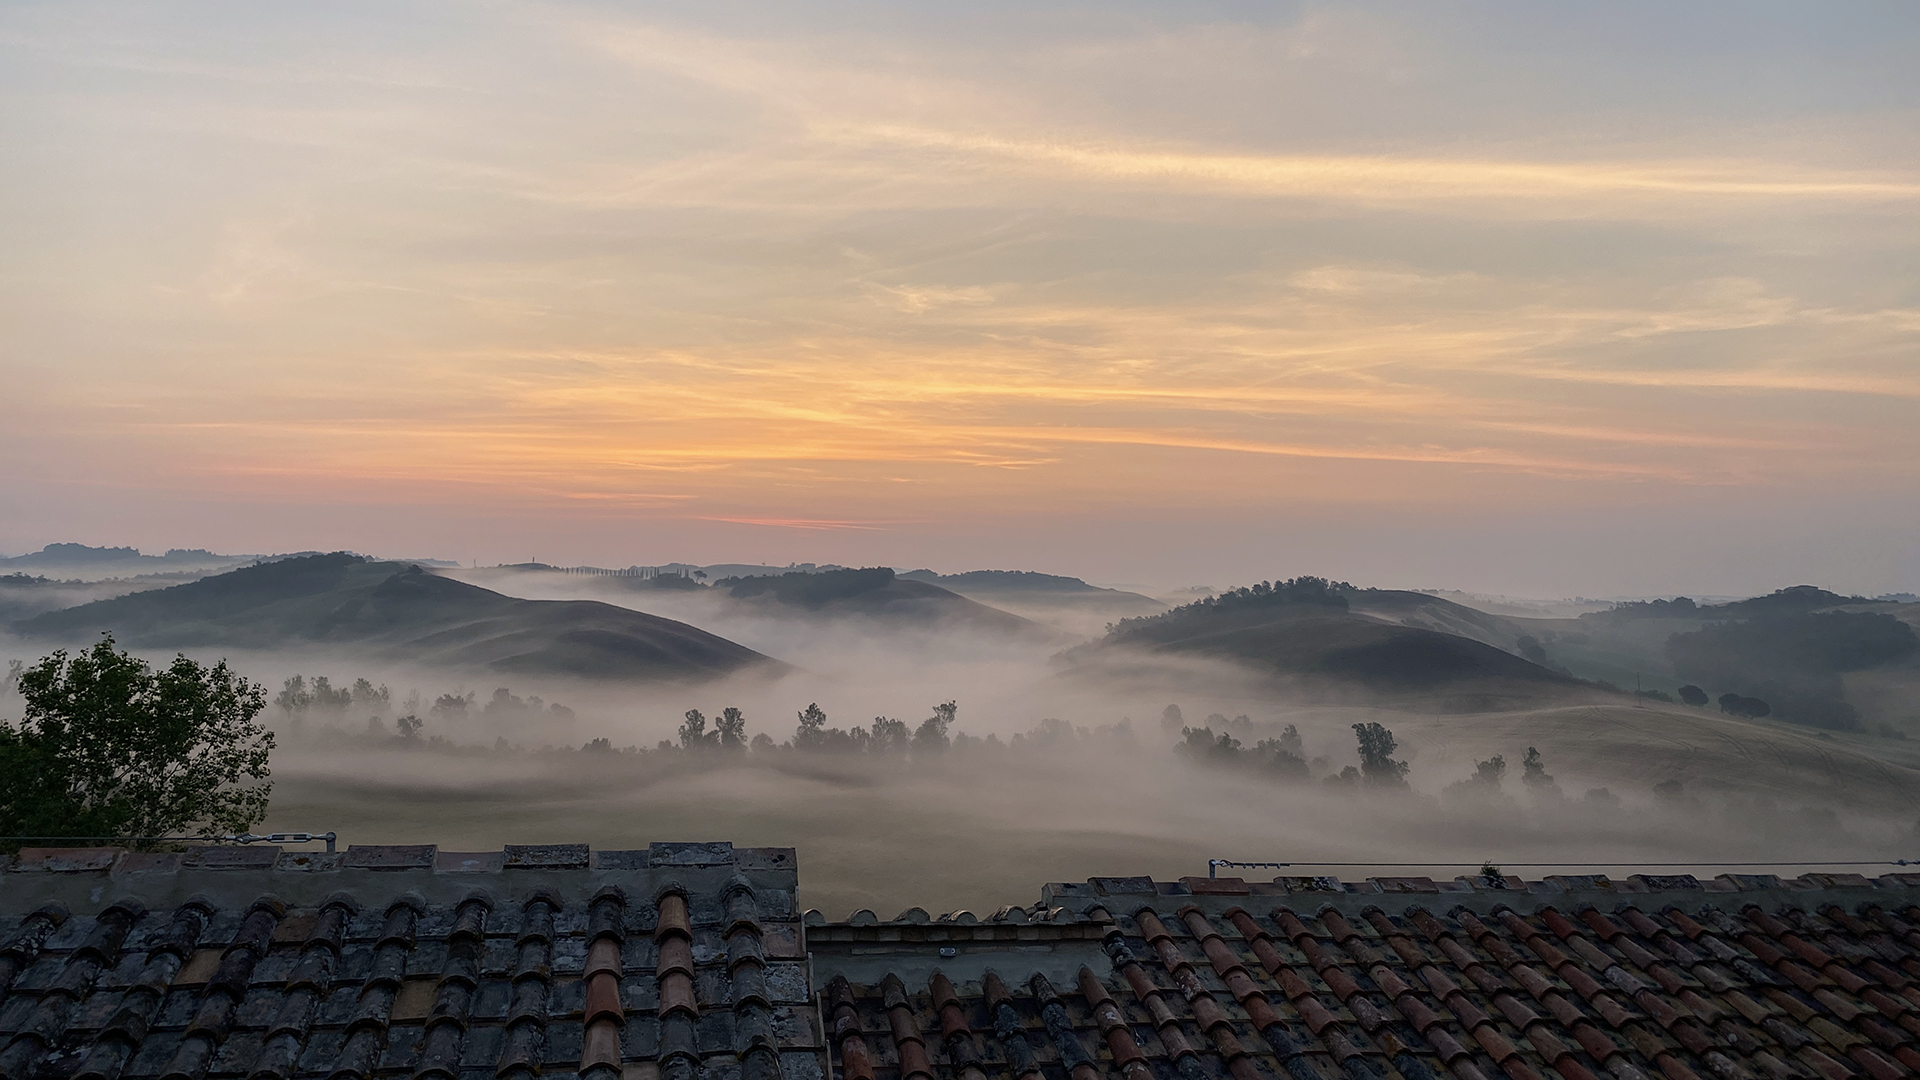 View of Tuscan countryside on a foggy day at sunrise from luxury hotel in Siena